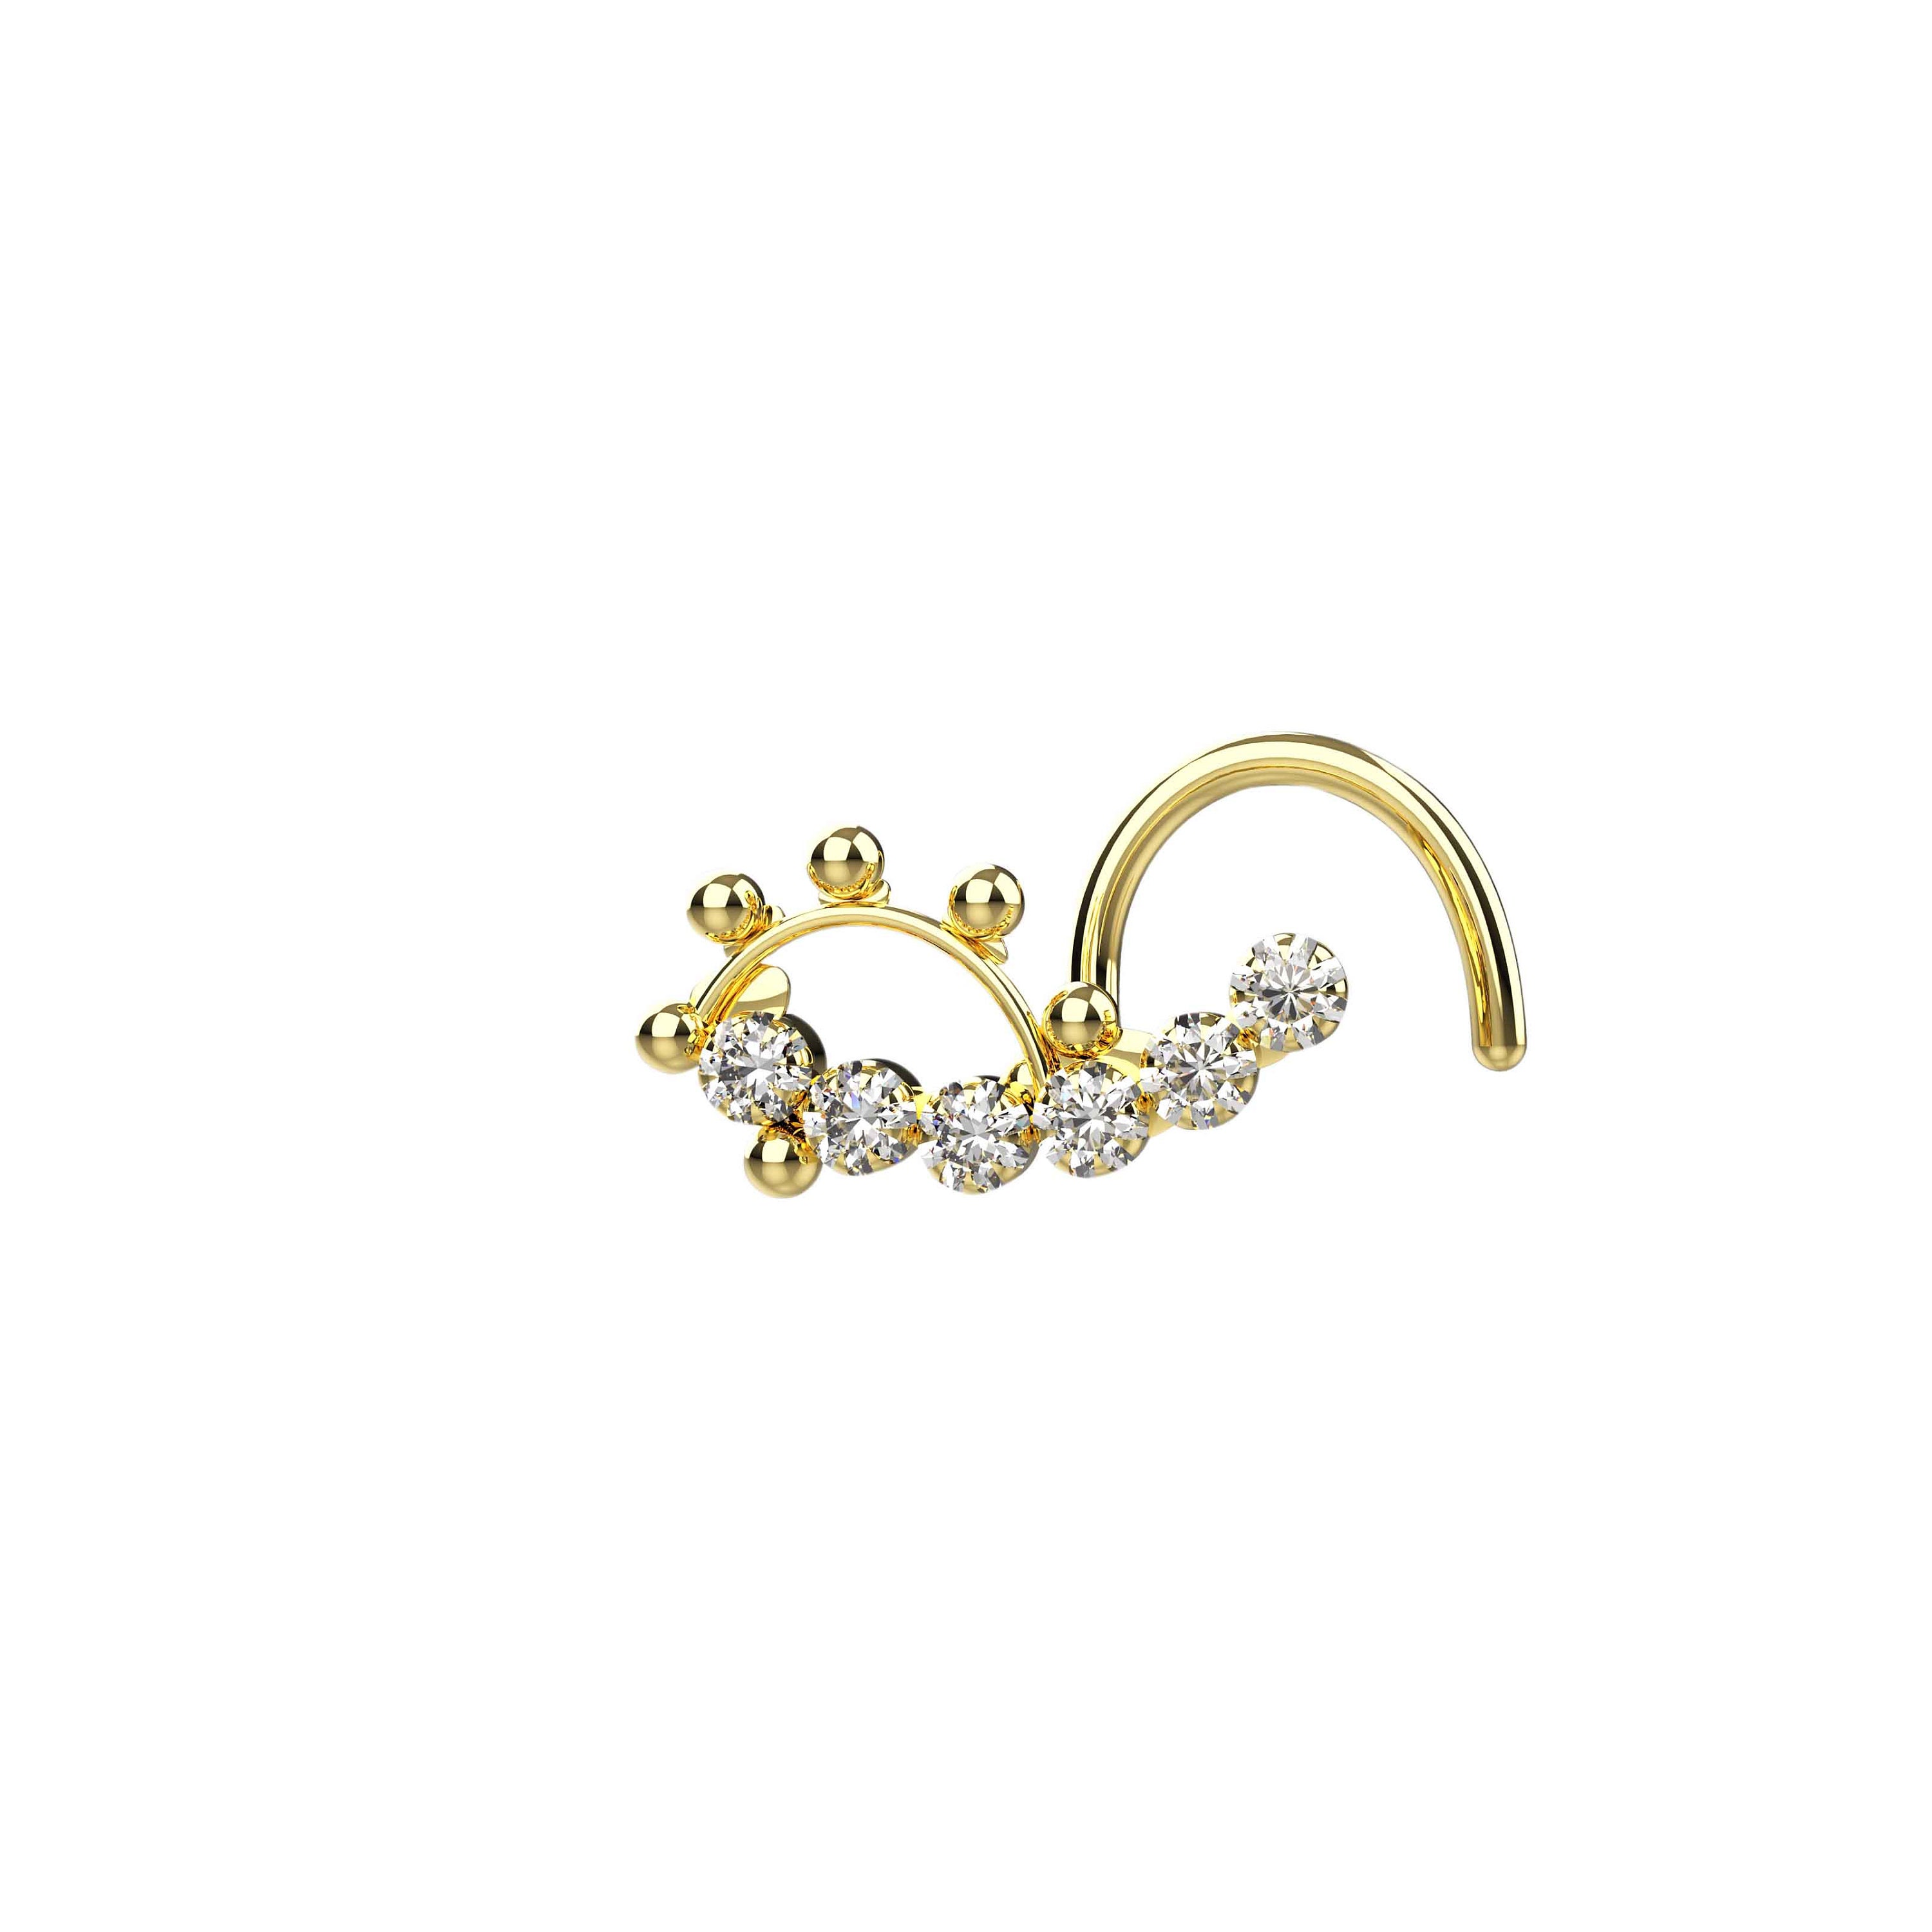 Buy KuberBox 14K Yellow Gold Atricia Diamond Nose Ring For Women (Left  Side, Piercing Required, 8mm inner diameter) at Amazon.in